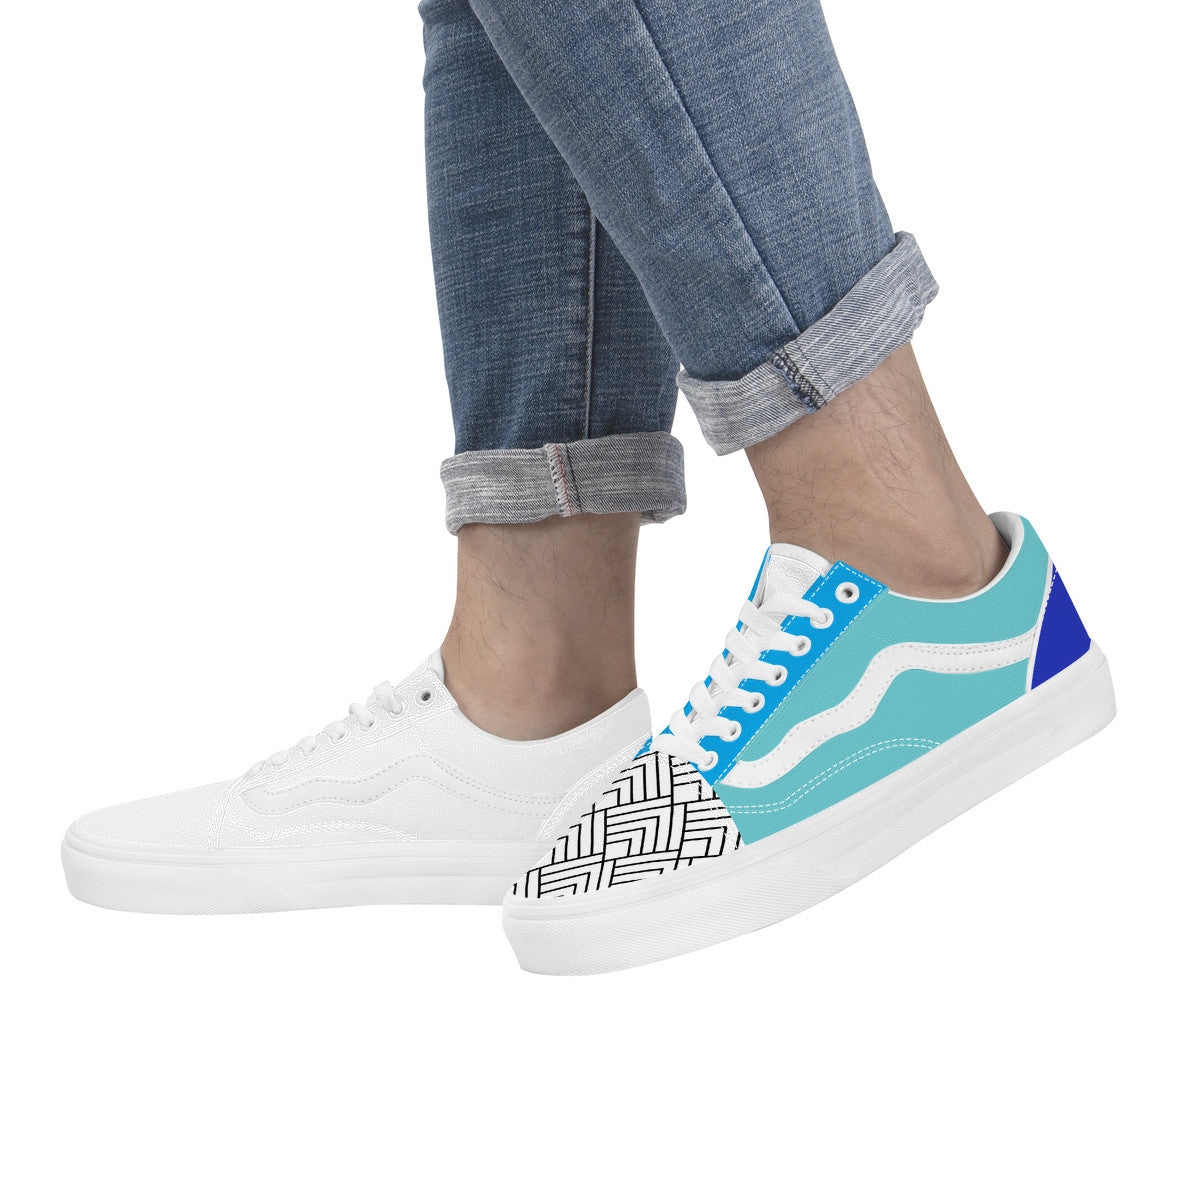 Create Your Own Low Top Flat Sneaker